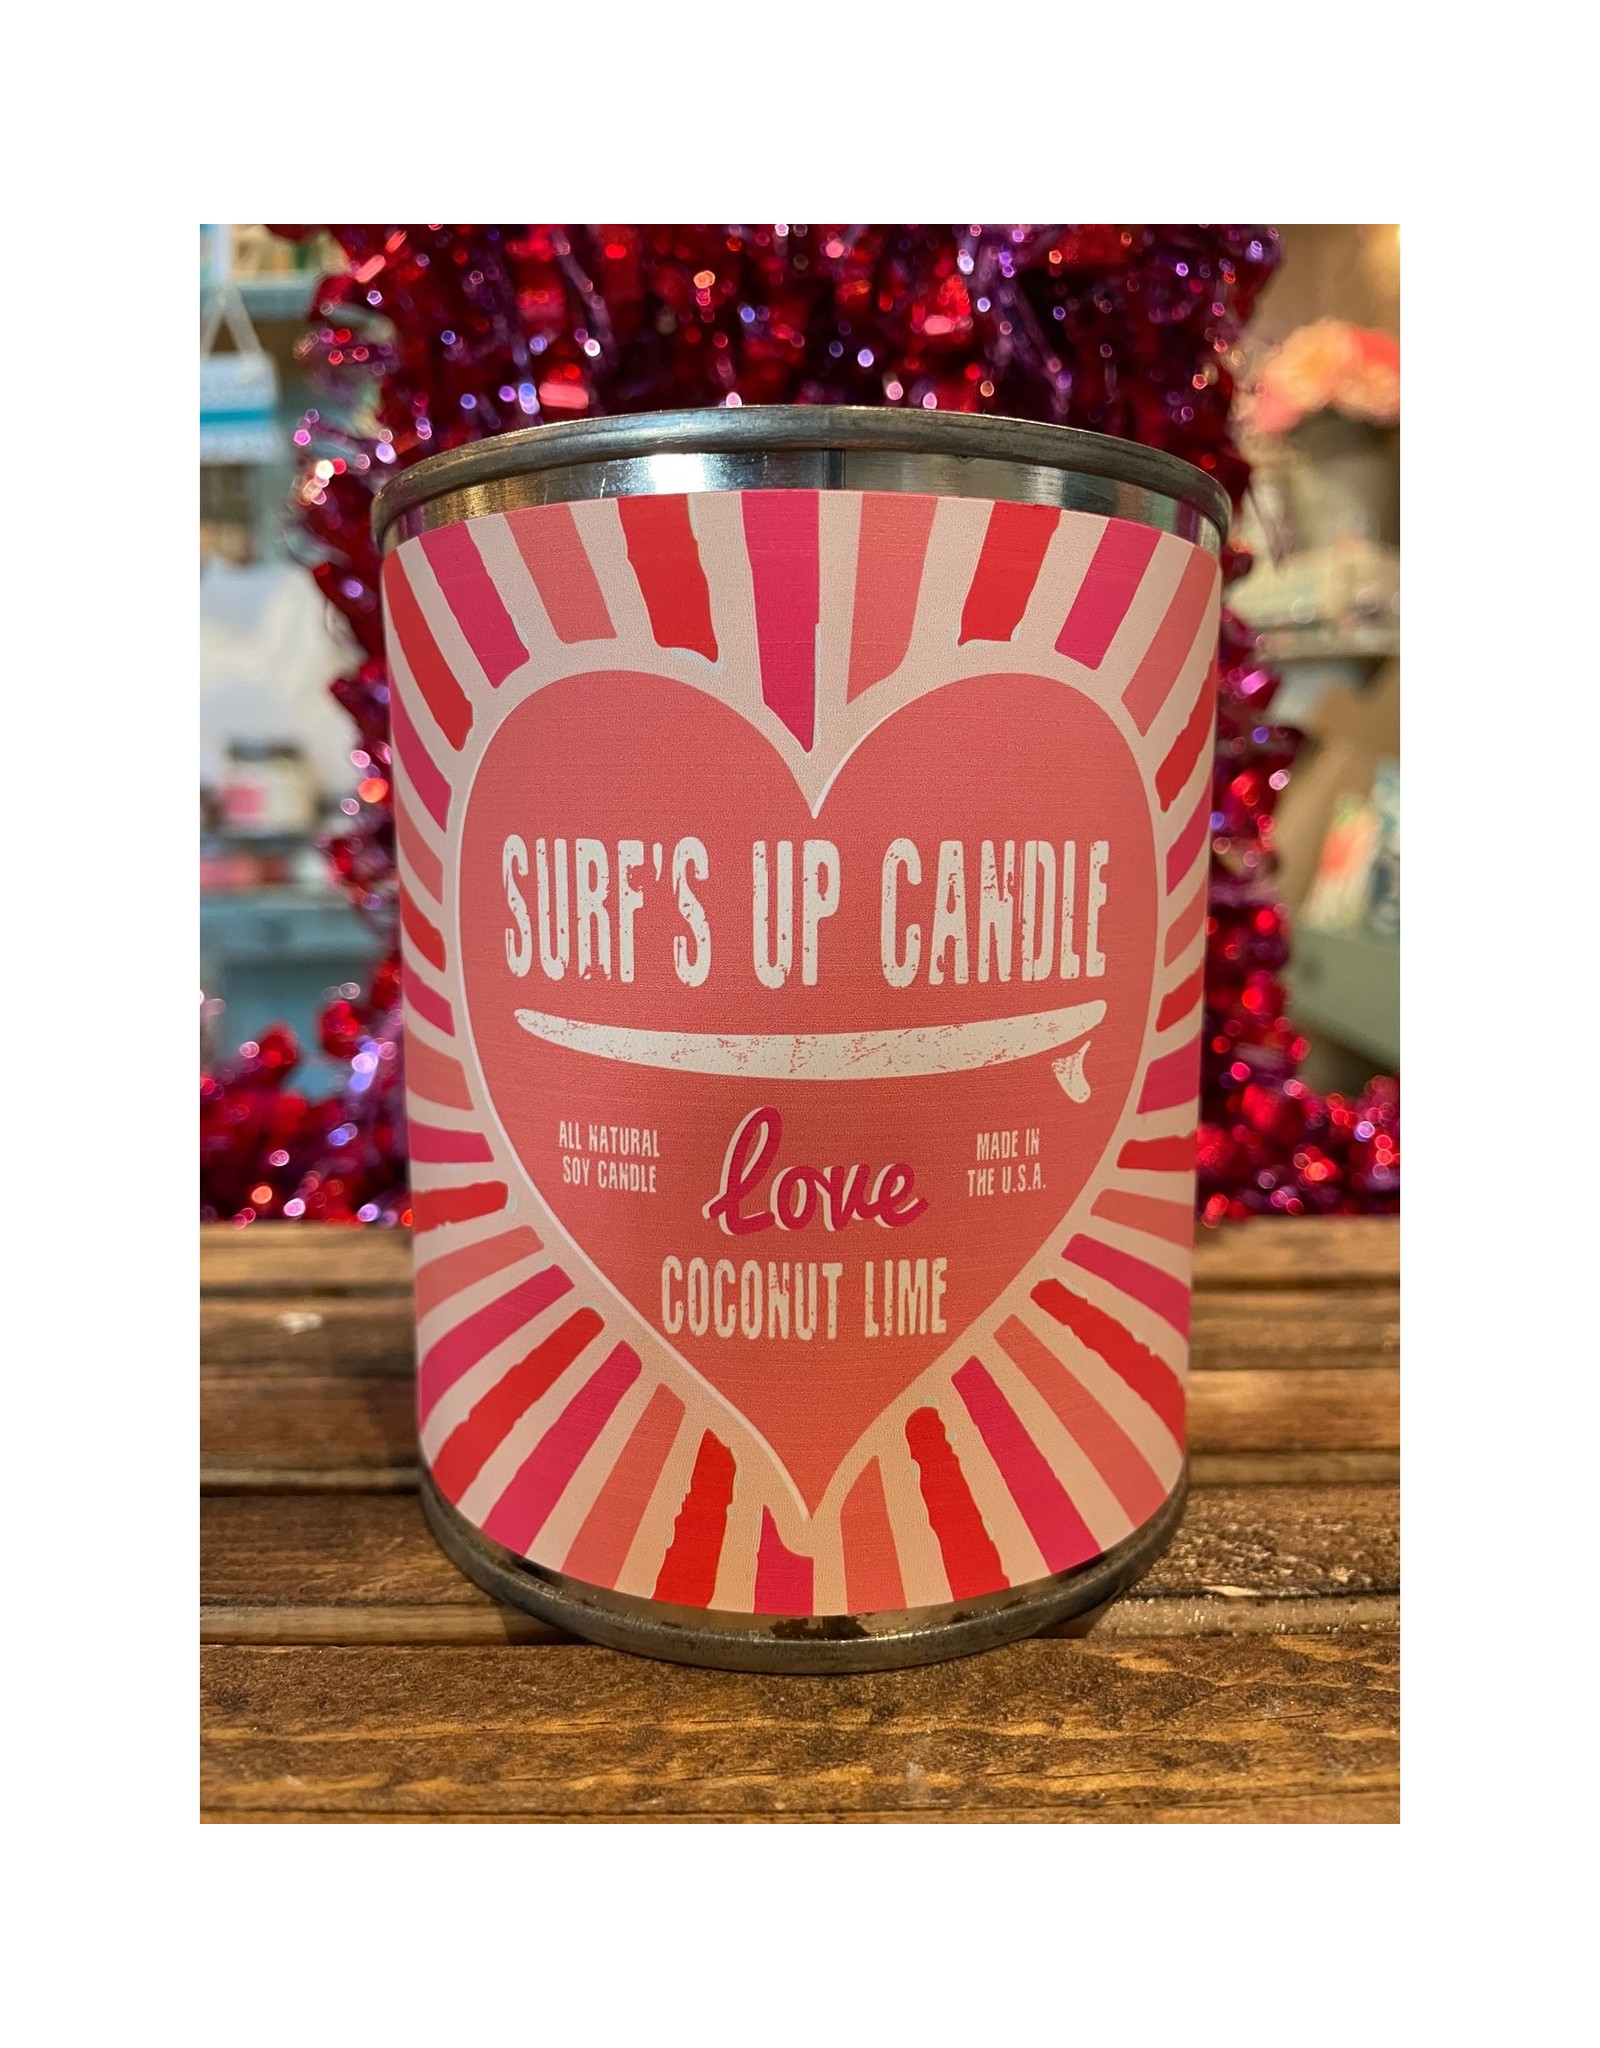 Surfs Up Candle Coconut Lime Pint - Love - Valentines Day